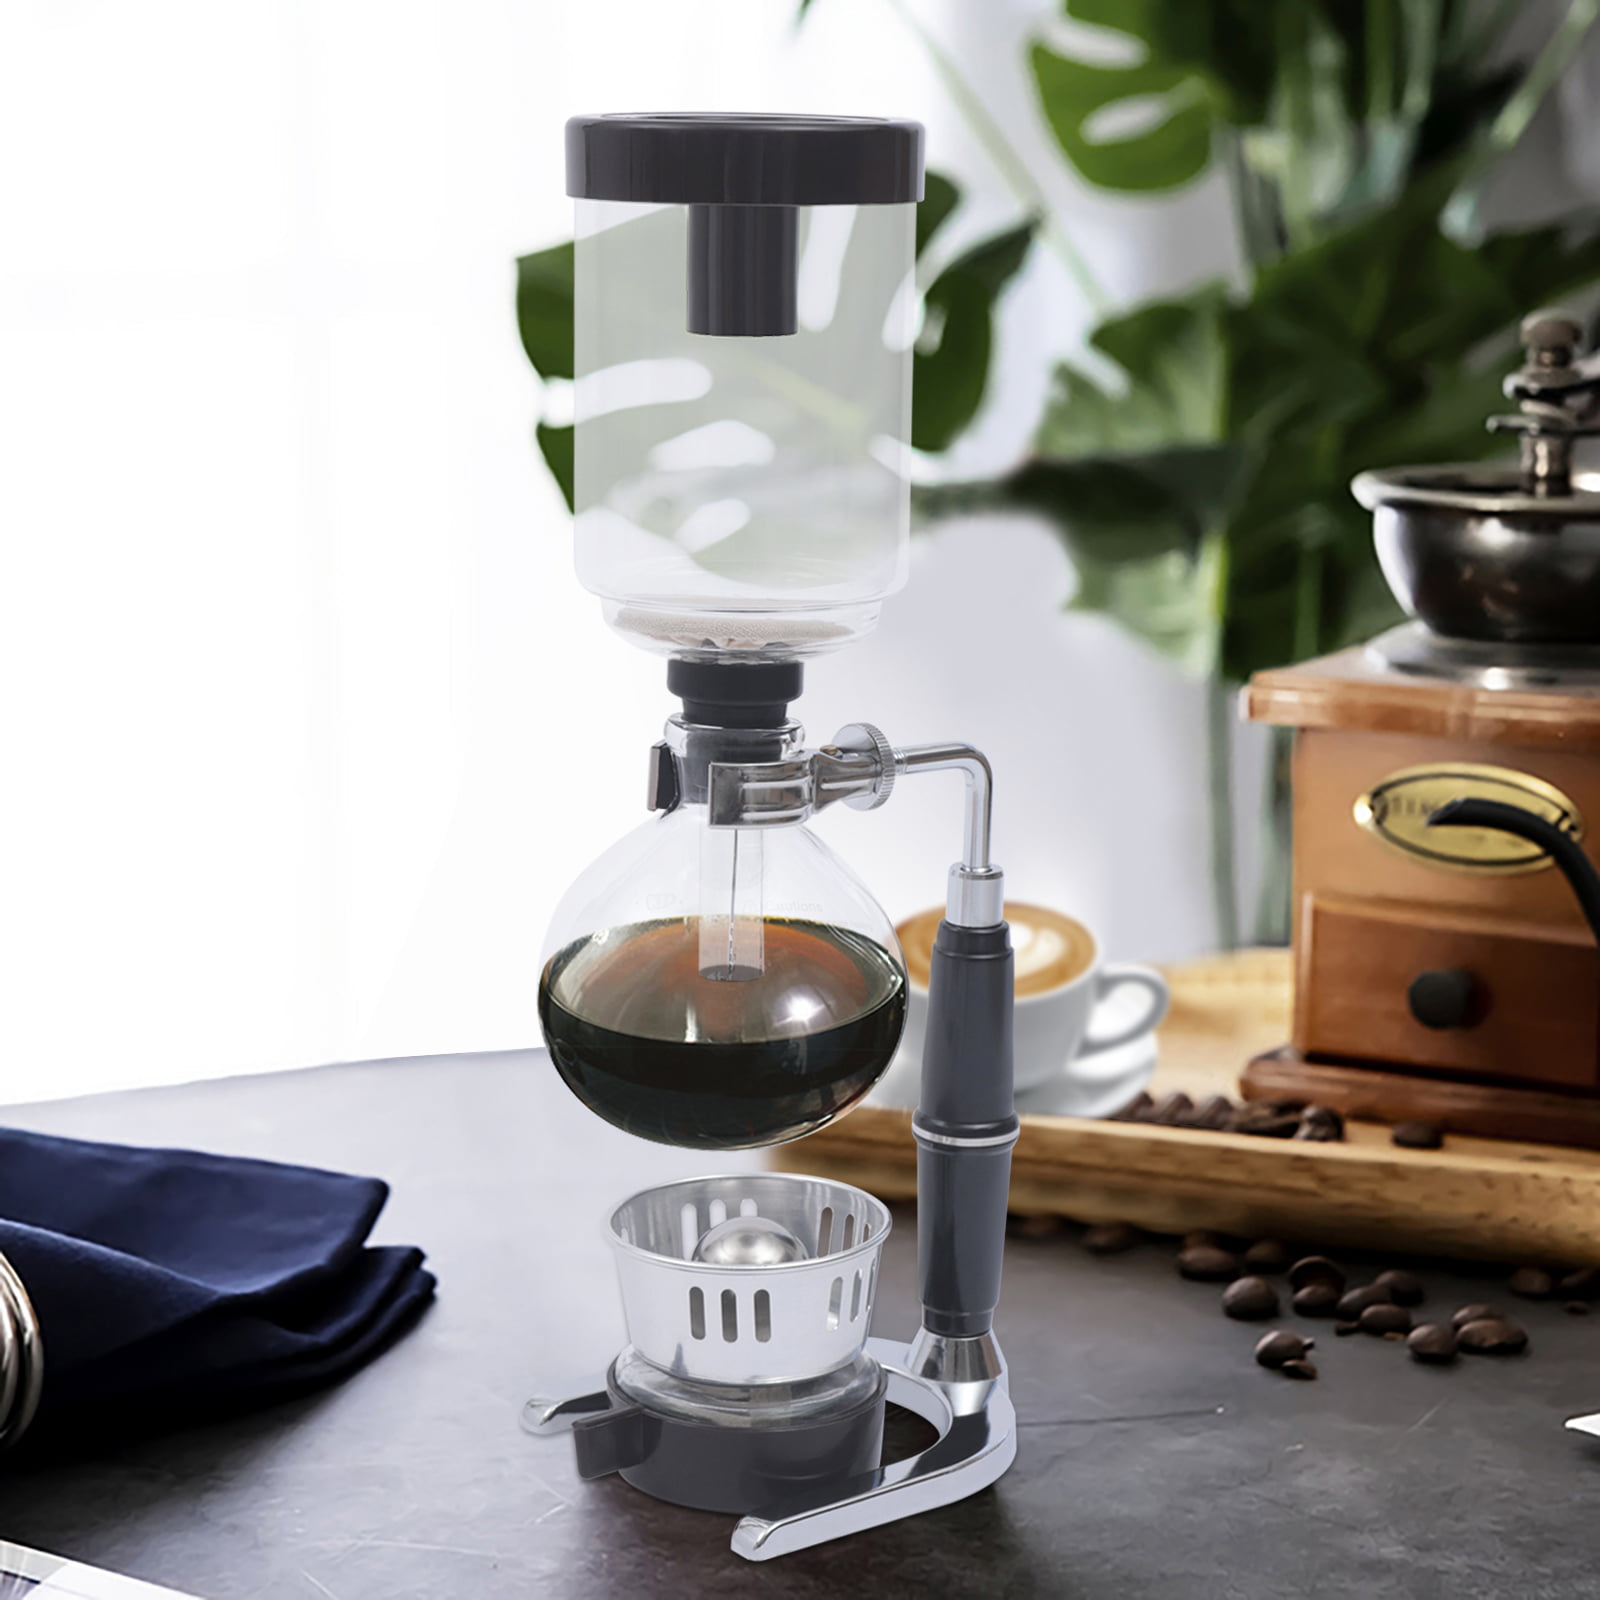 moo-1 Syphon Coffee Maker Japanese Style Vacuum Glass Siphon Pot Percolators 1-3 Cups Siphon Coffee Maker